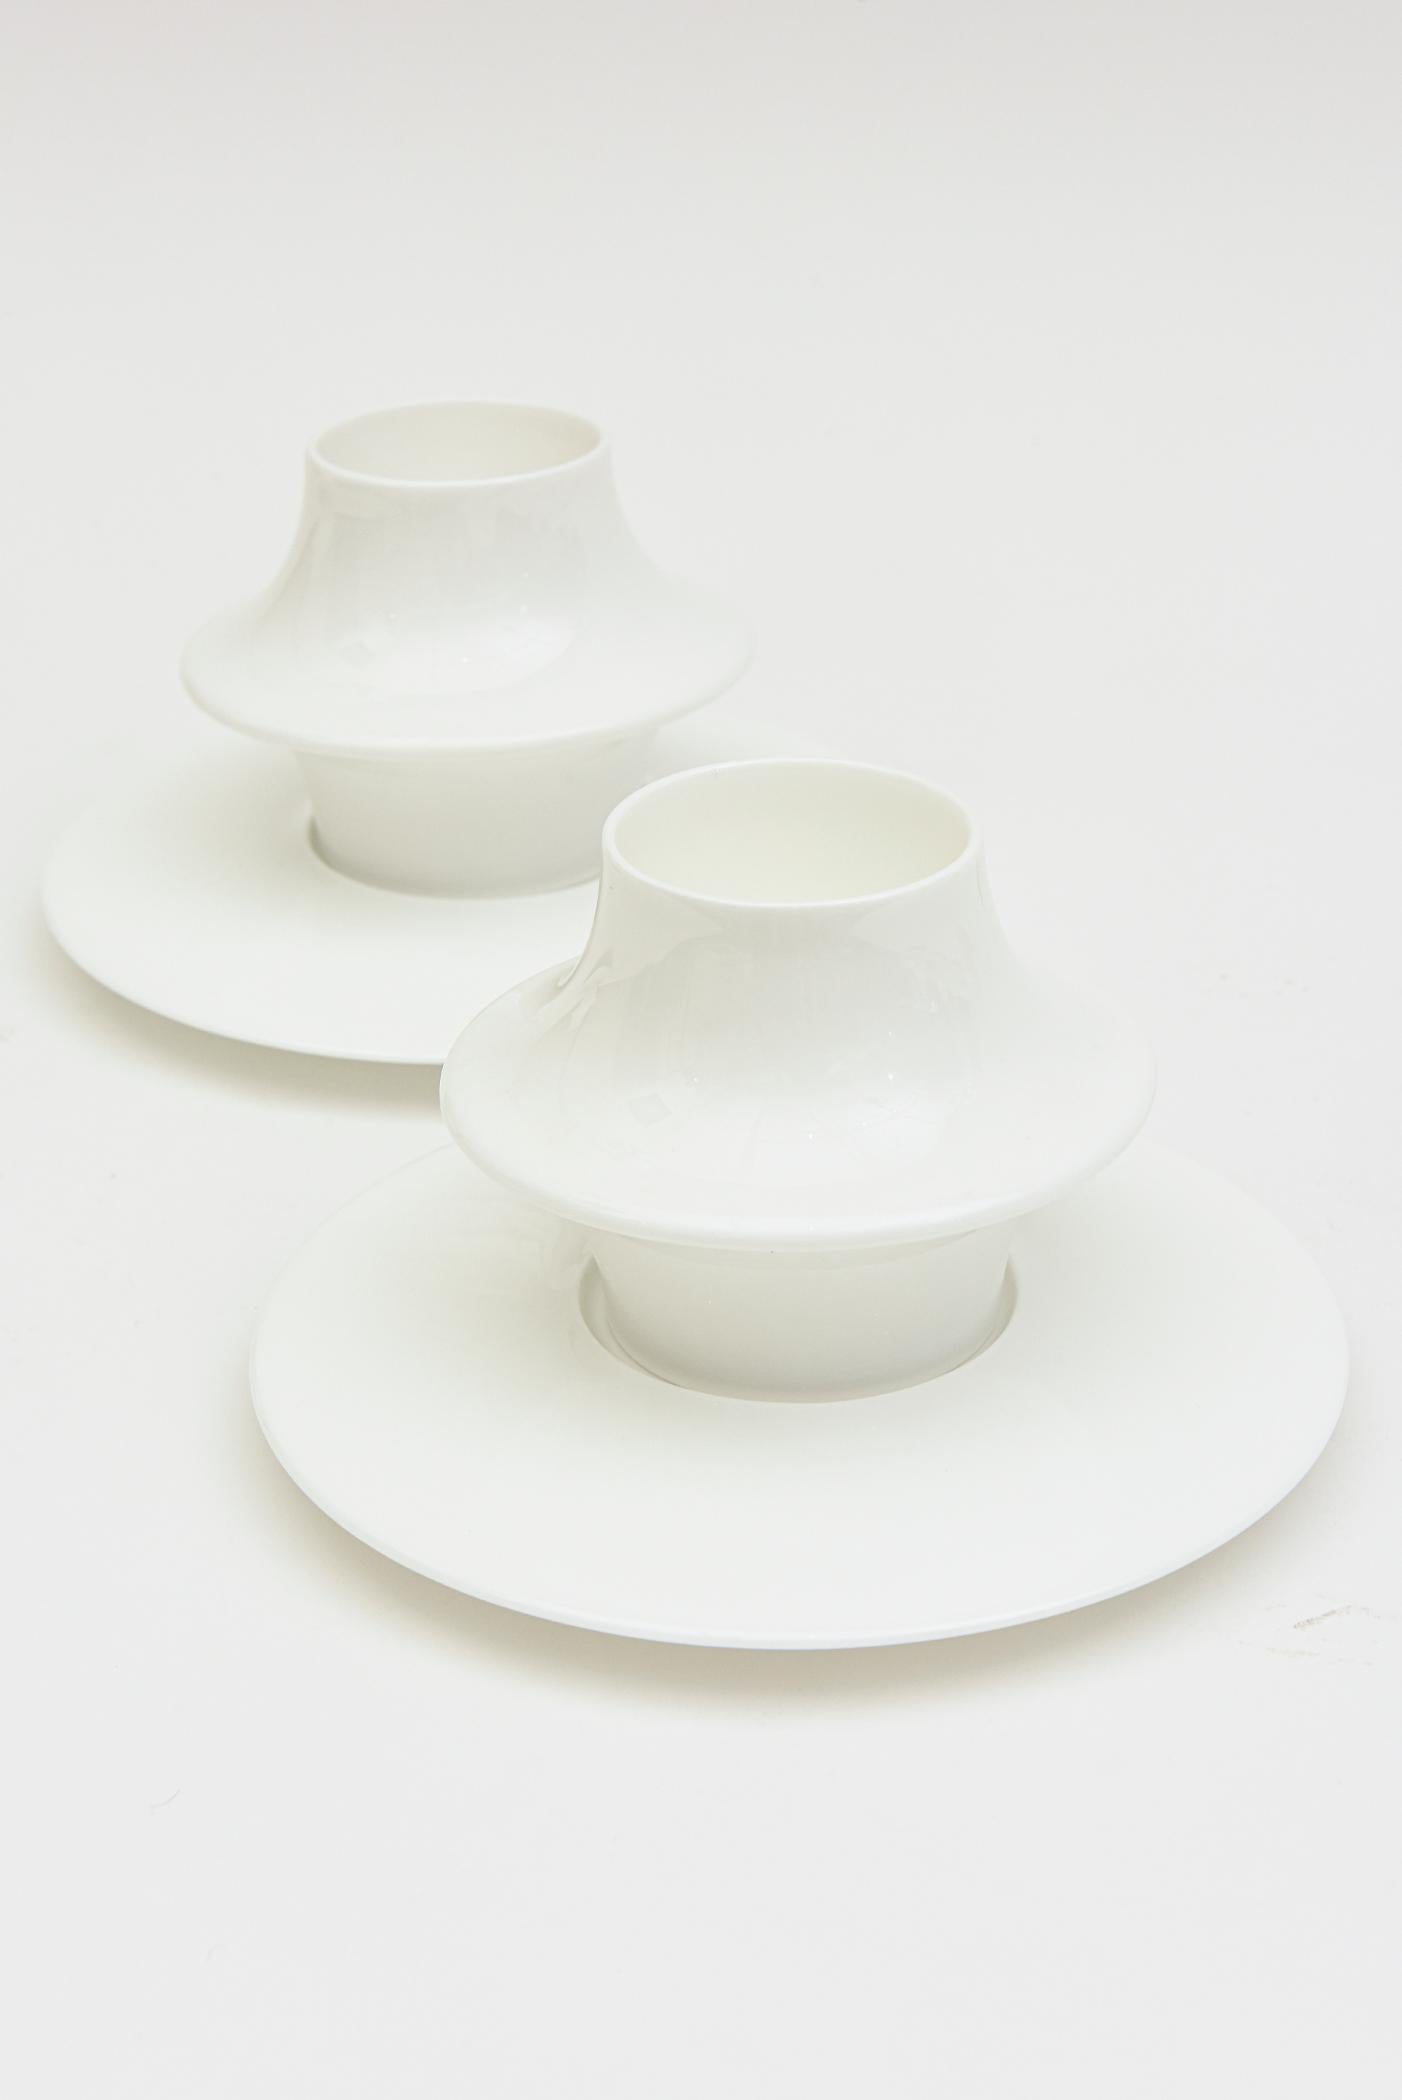 Italian  Alessi Bone China Tom Kovac Modernist Sculptural Expresso Cups with Saucers S/7